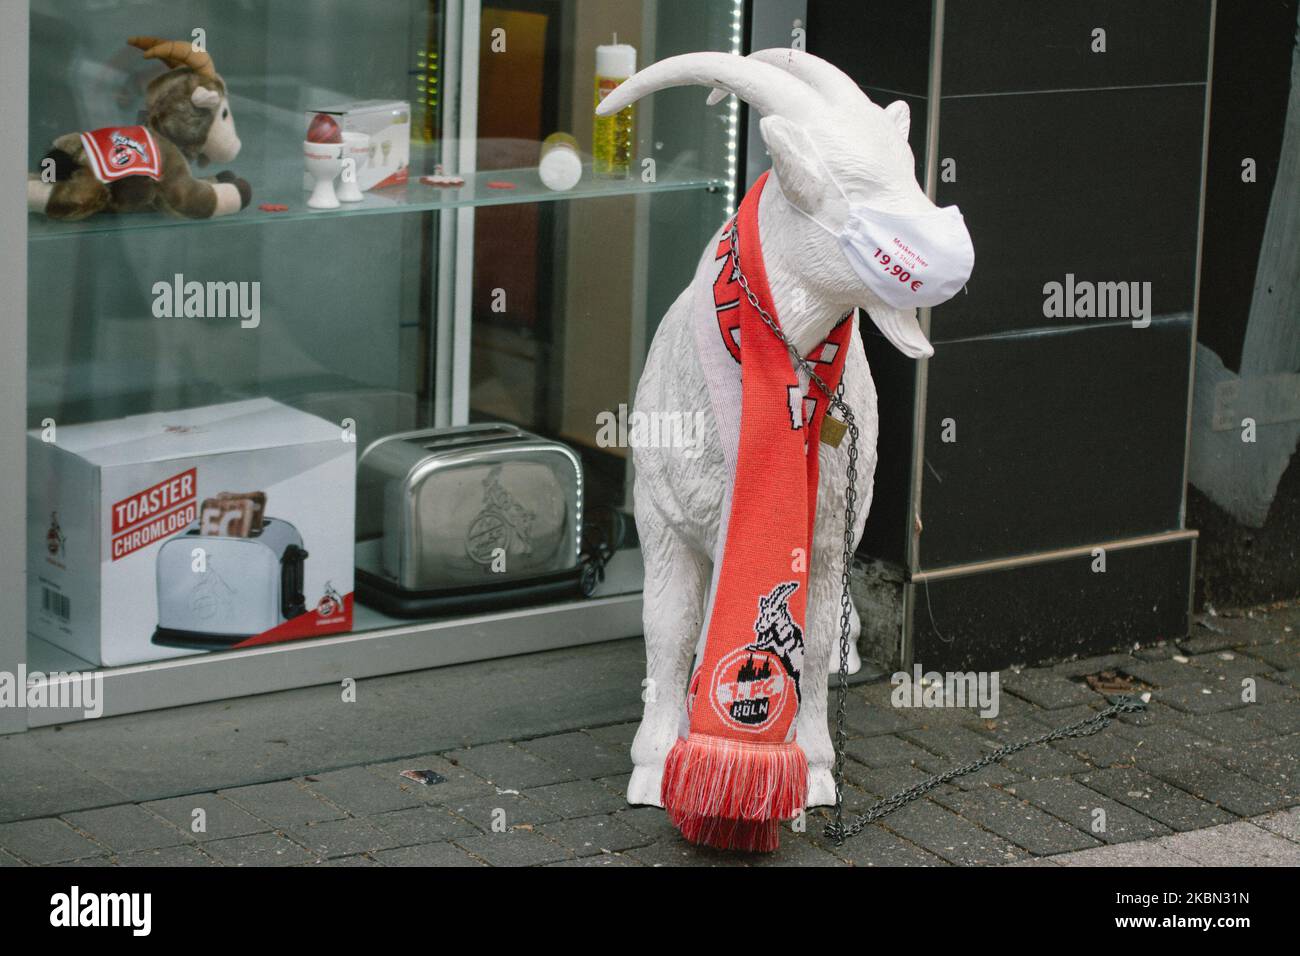 A billy goat which is local favorite Germany football Club 1 FC Cologne in Cologne, Germany on April 29, 2020, with face masks stands outside a store. (Photo by Ying Tang/NurPhoto) Stock Photo